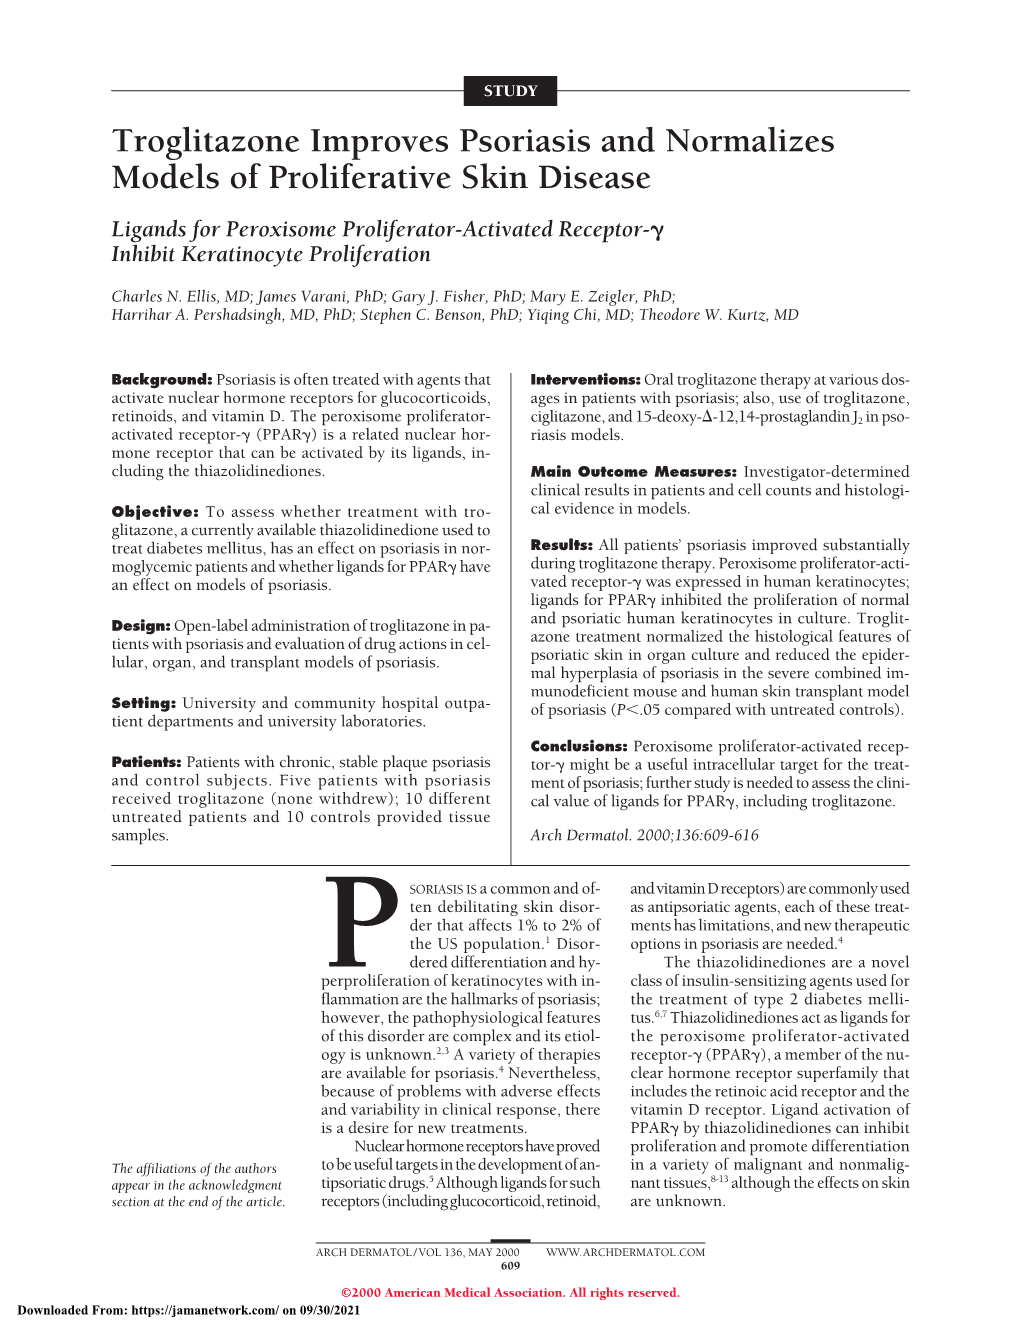 Troglitazone Improves Psoriasis and Normalizes Models of Proliferative